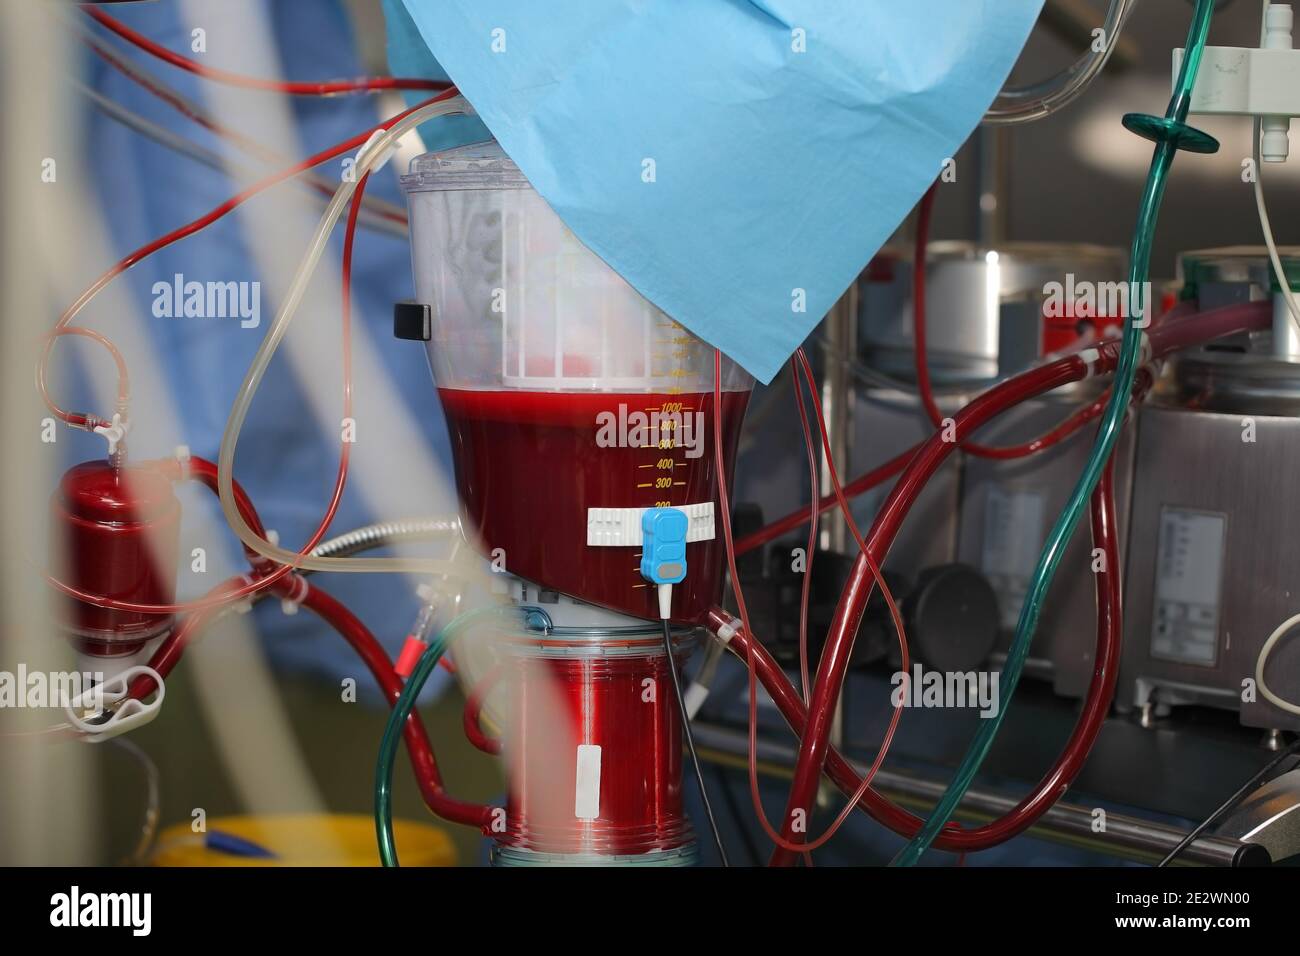 Artificial blood-circulation apparatus full of blood. Stock Photo